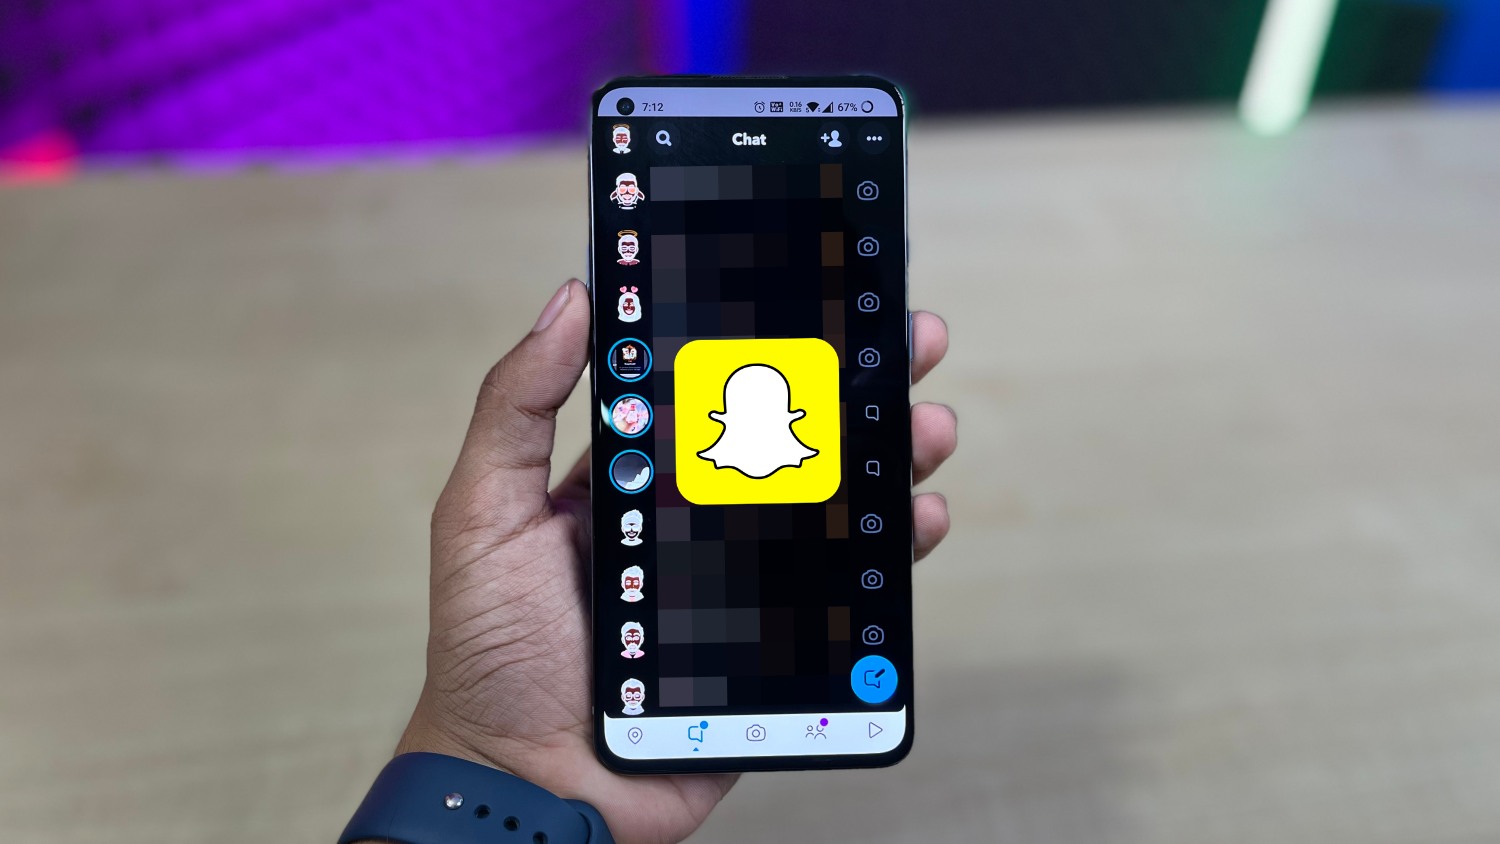 Dark Mode in Snapchat on Android iOS